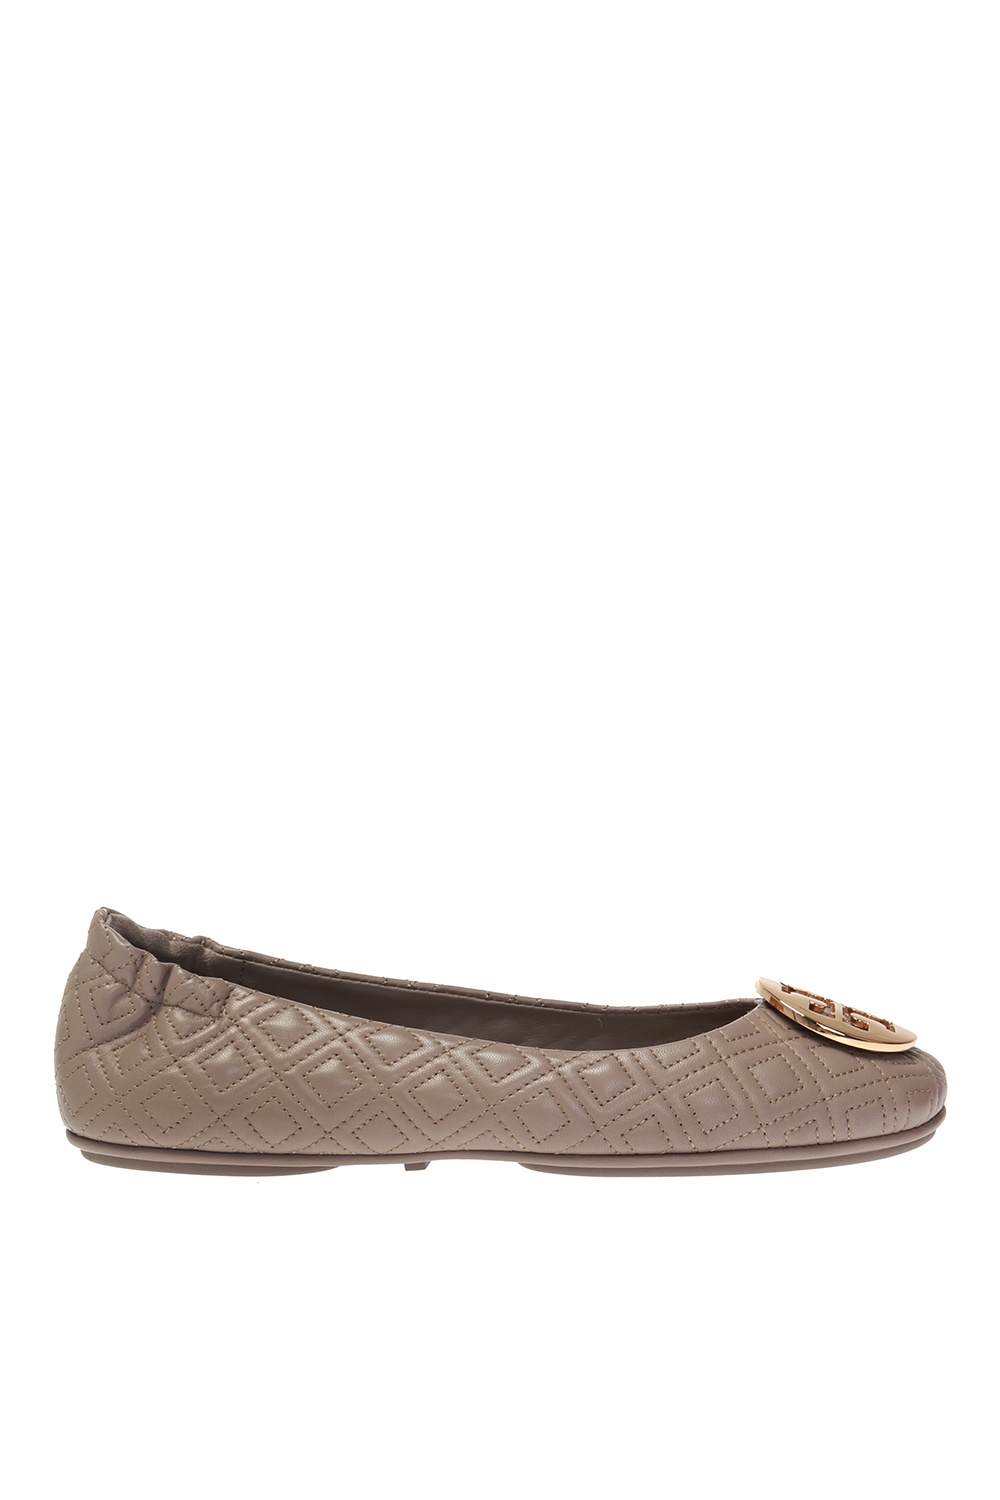 Beige Leather ballet flats with logo Tory Burch - Vitkac France